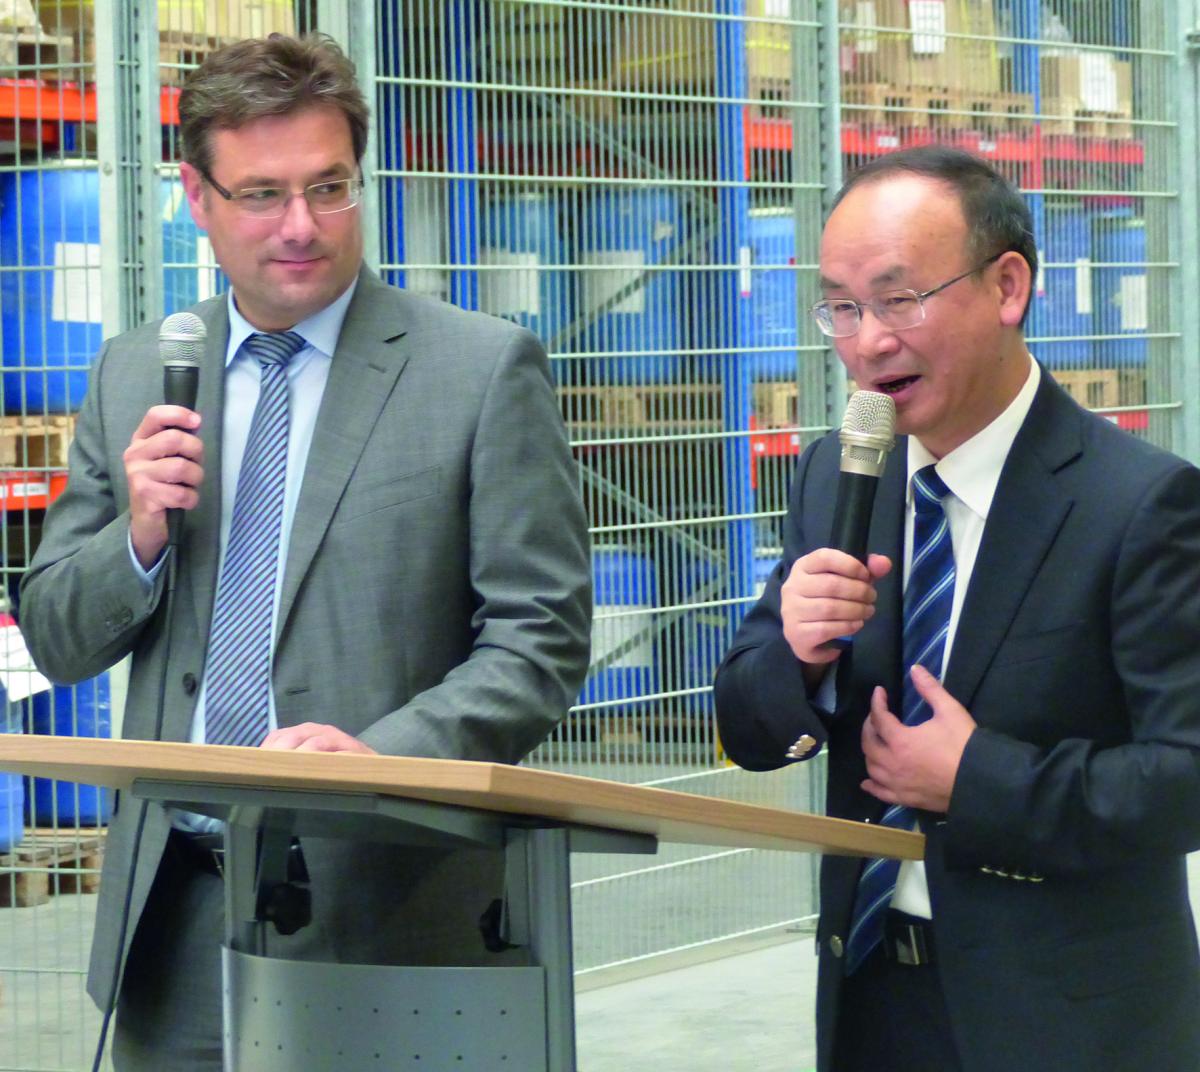 (from left to right: Paulo Alexandre, CEO Romaco Group, and Yue Tang, Chairman and President of the Truking Group)